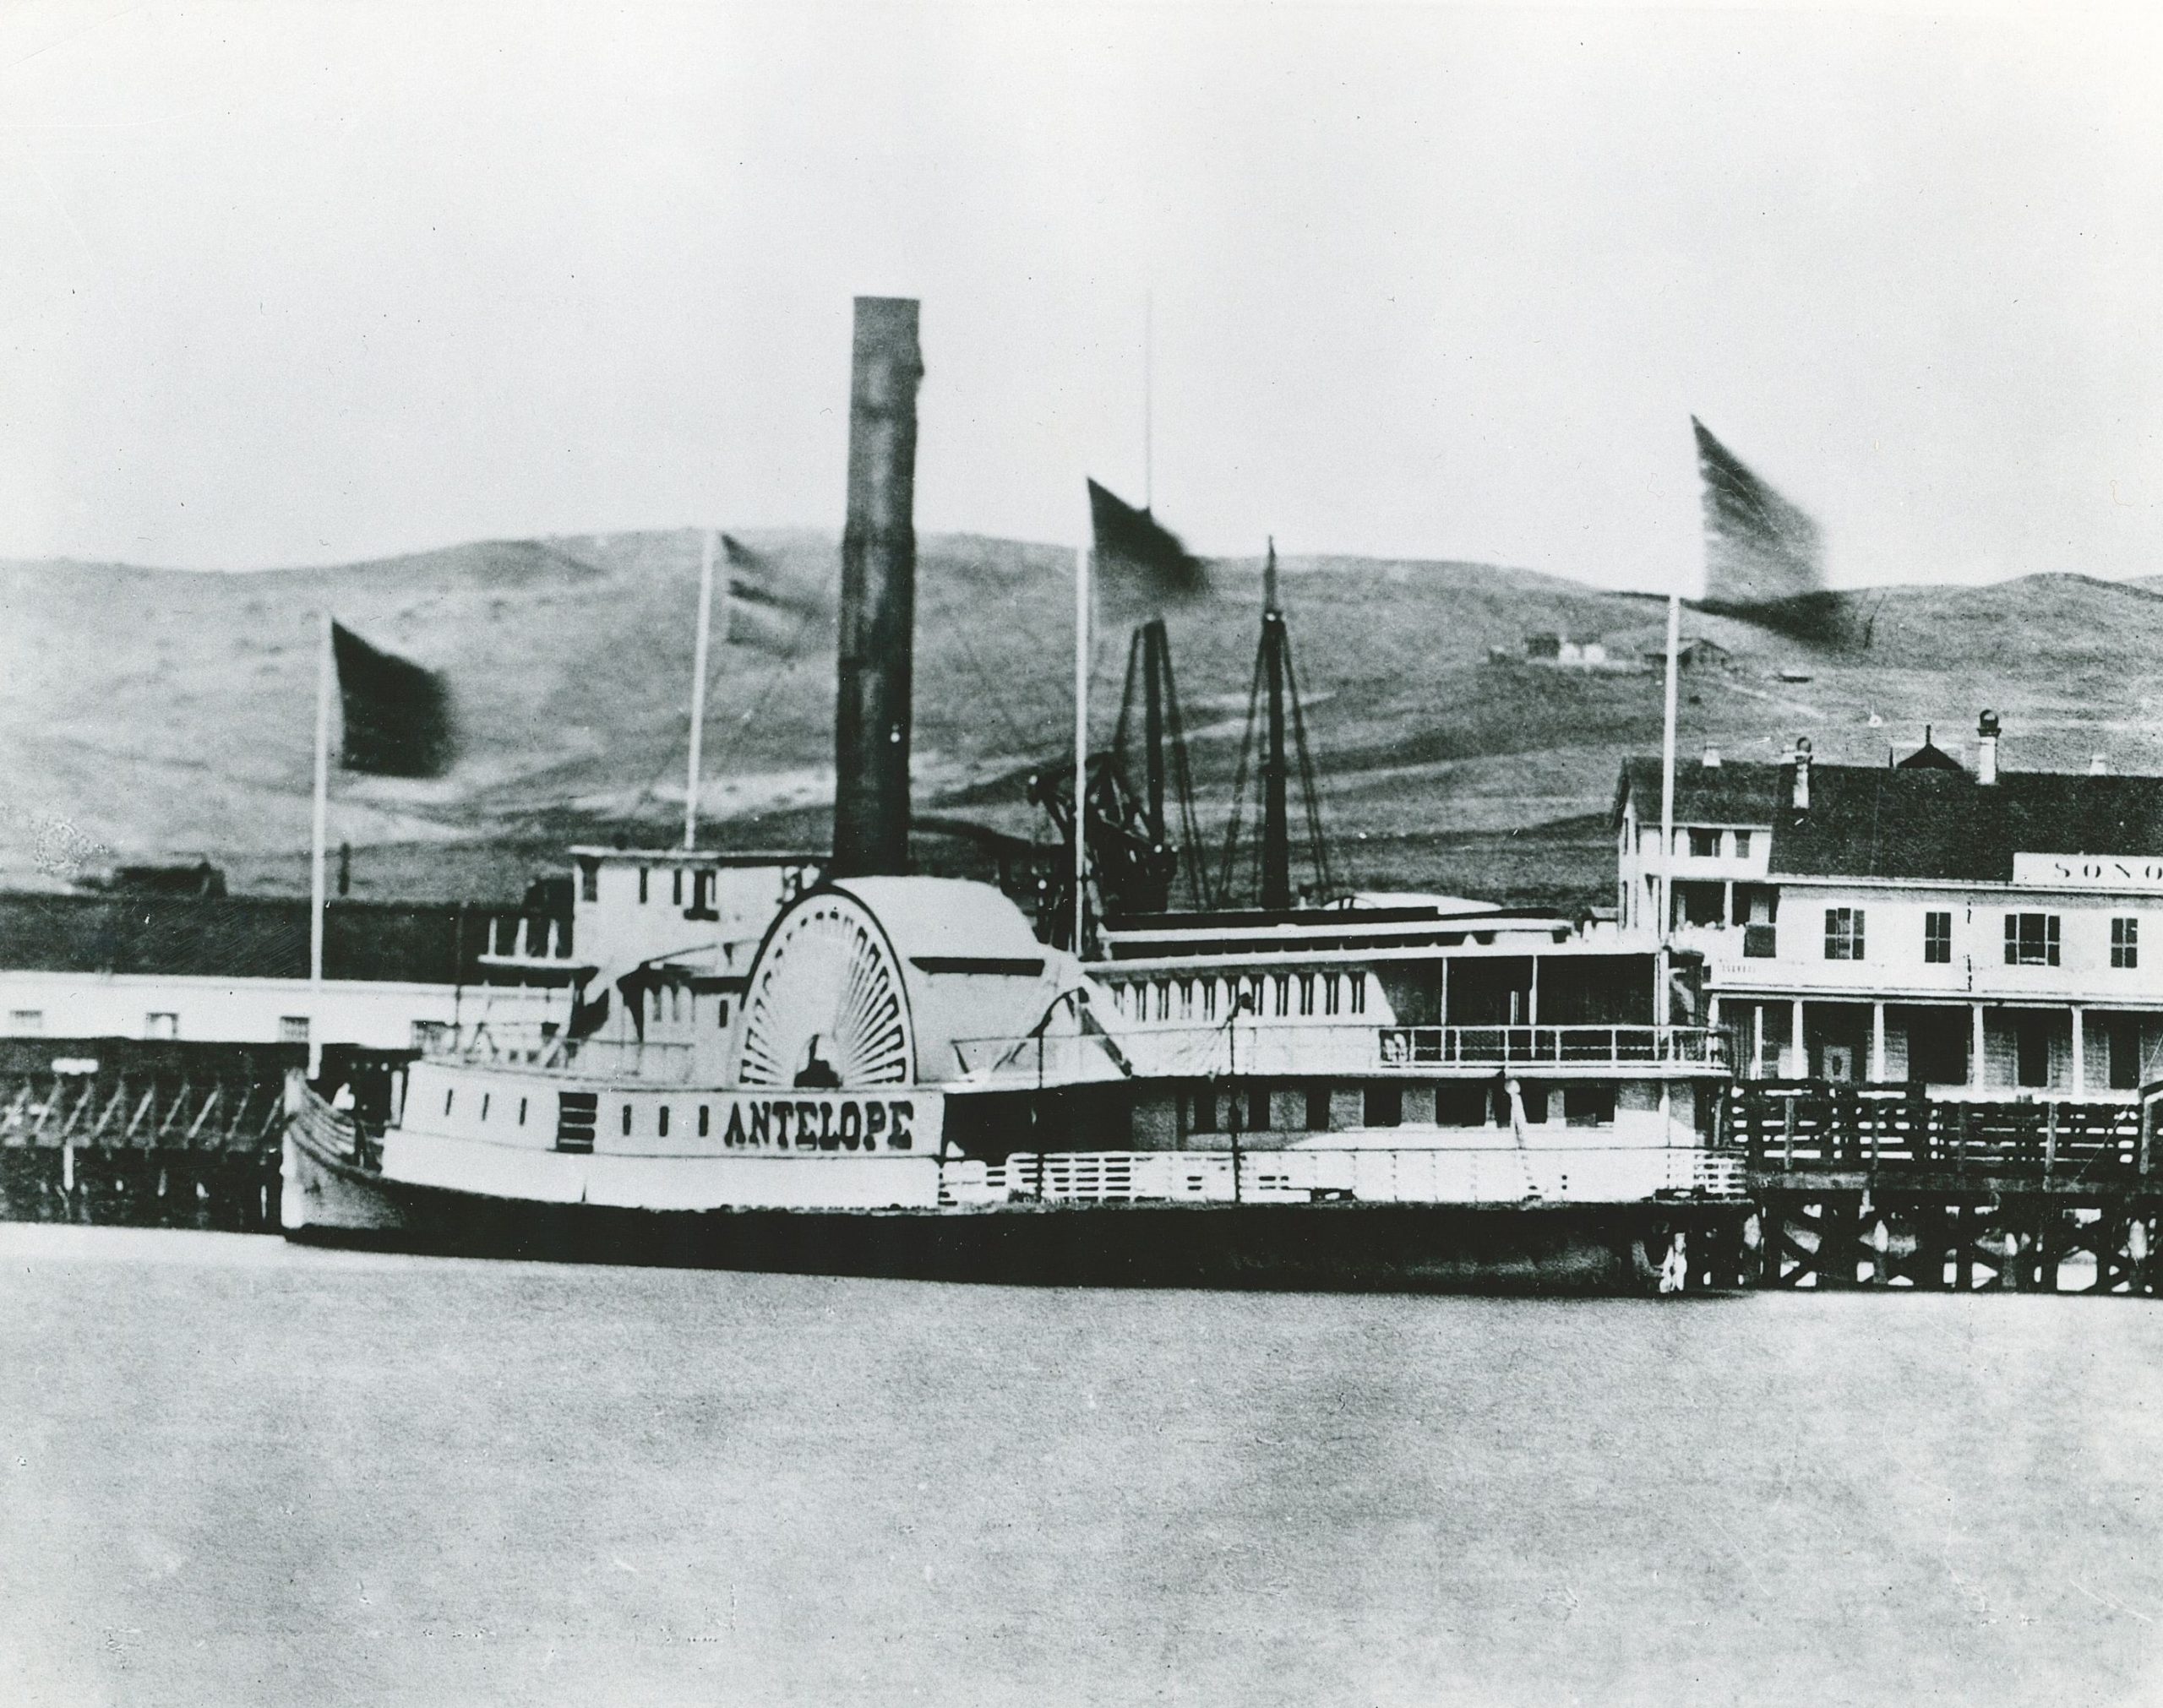 A black and white photo shows a large ship docked at a wharf with the bow pointed to left. The name Antelope is prominent on its paddlewheel on the port side. Hills are in the background, and the wharf building is to the right.